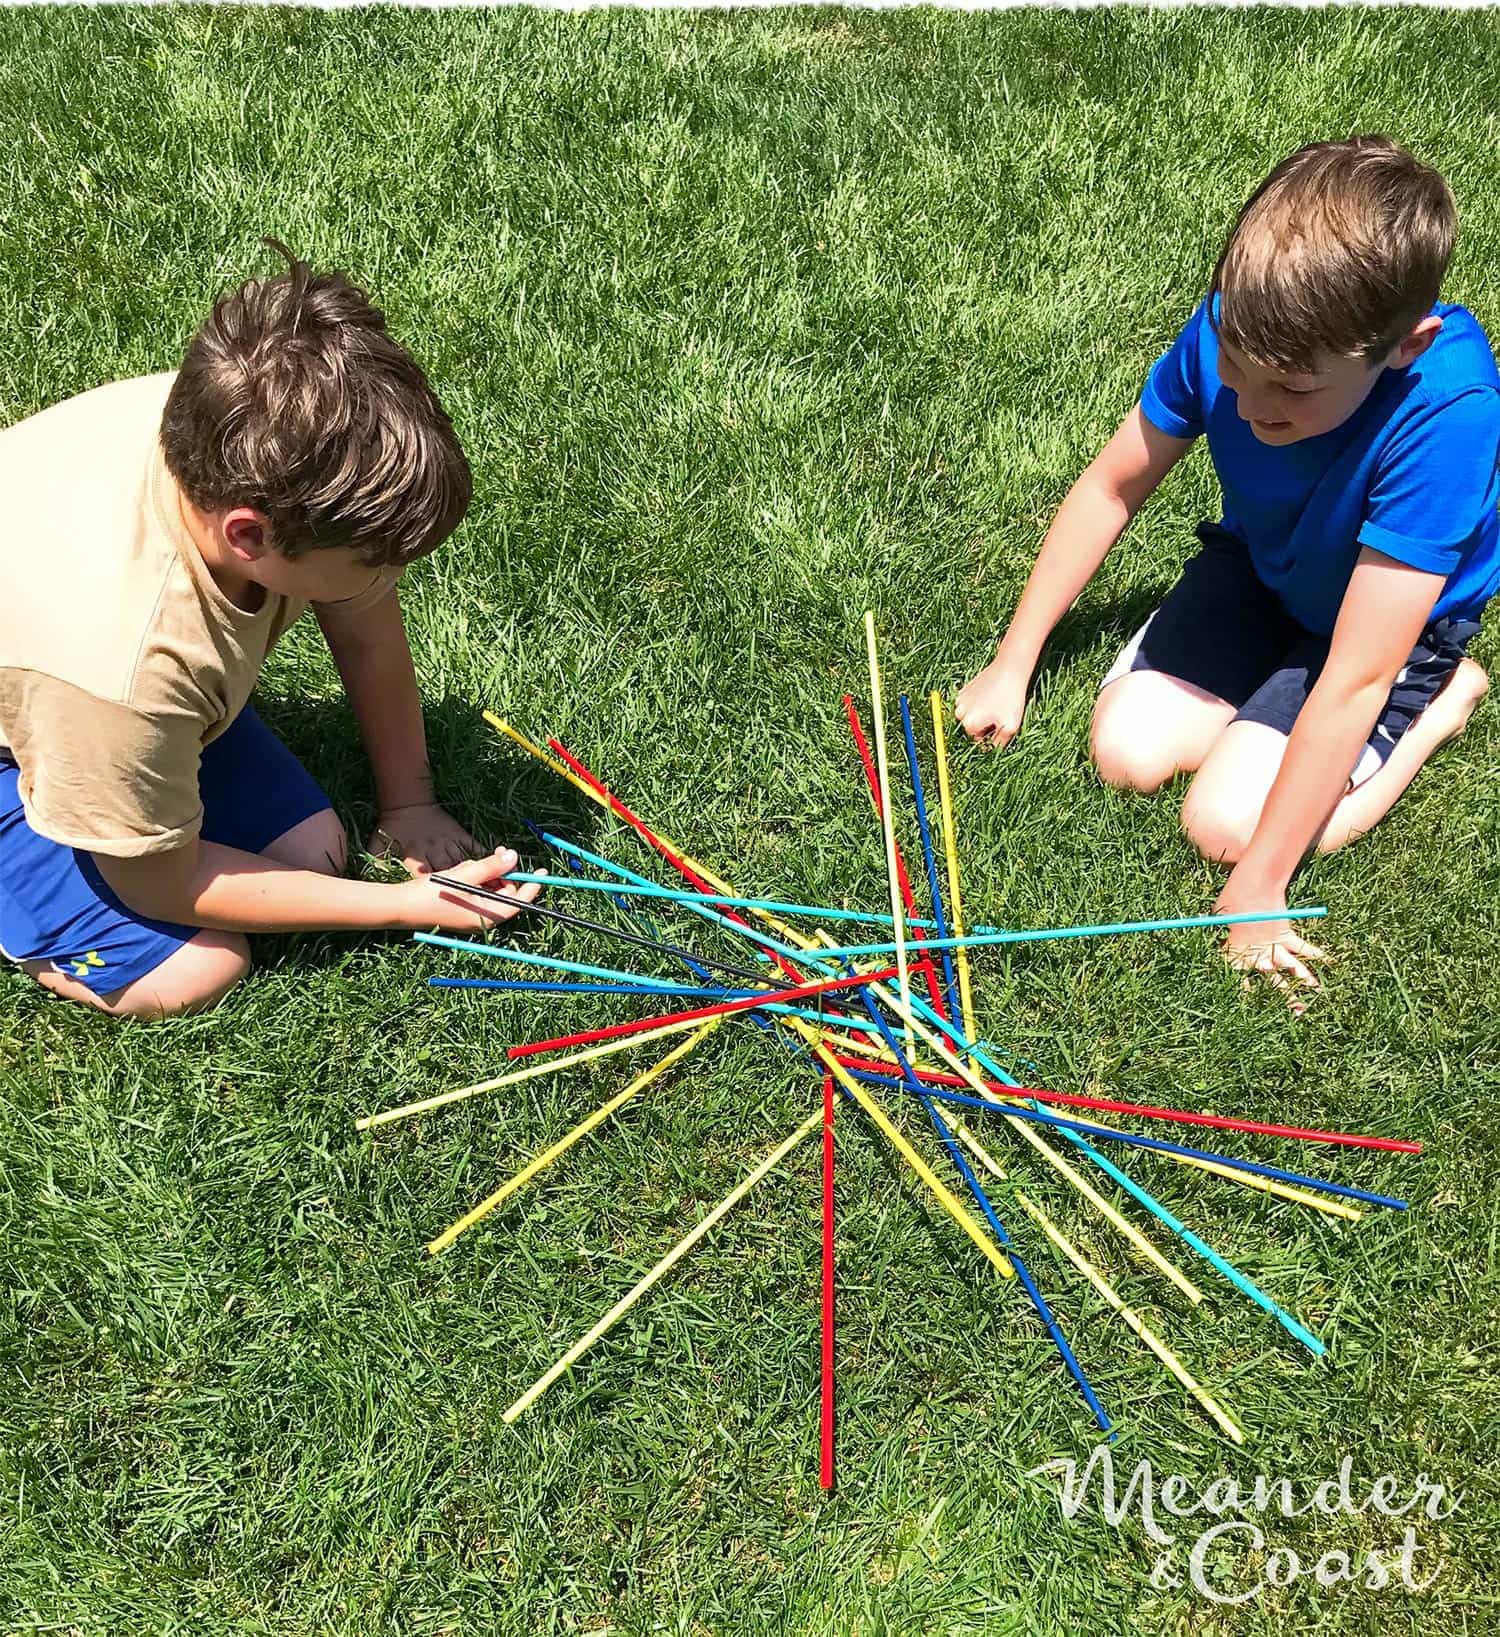 two children in grass, playing with giant pick up sticks game